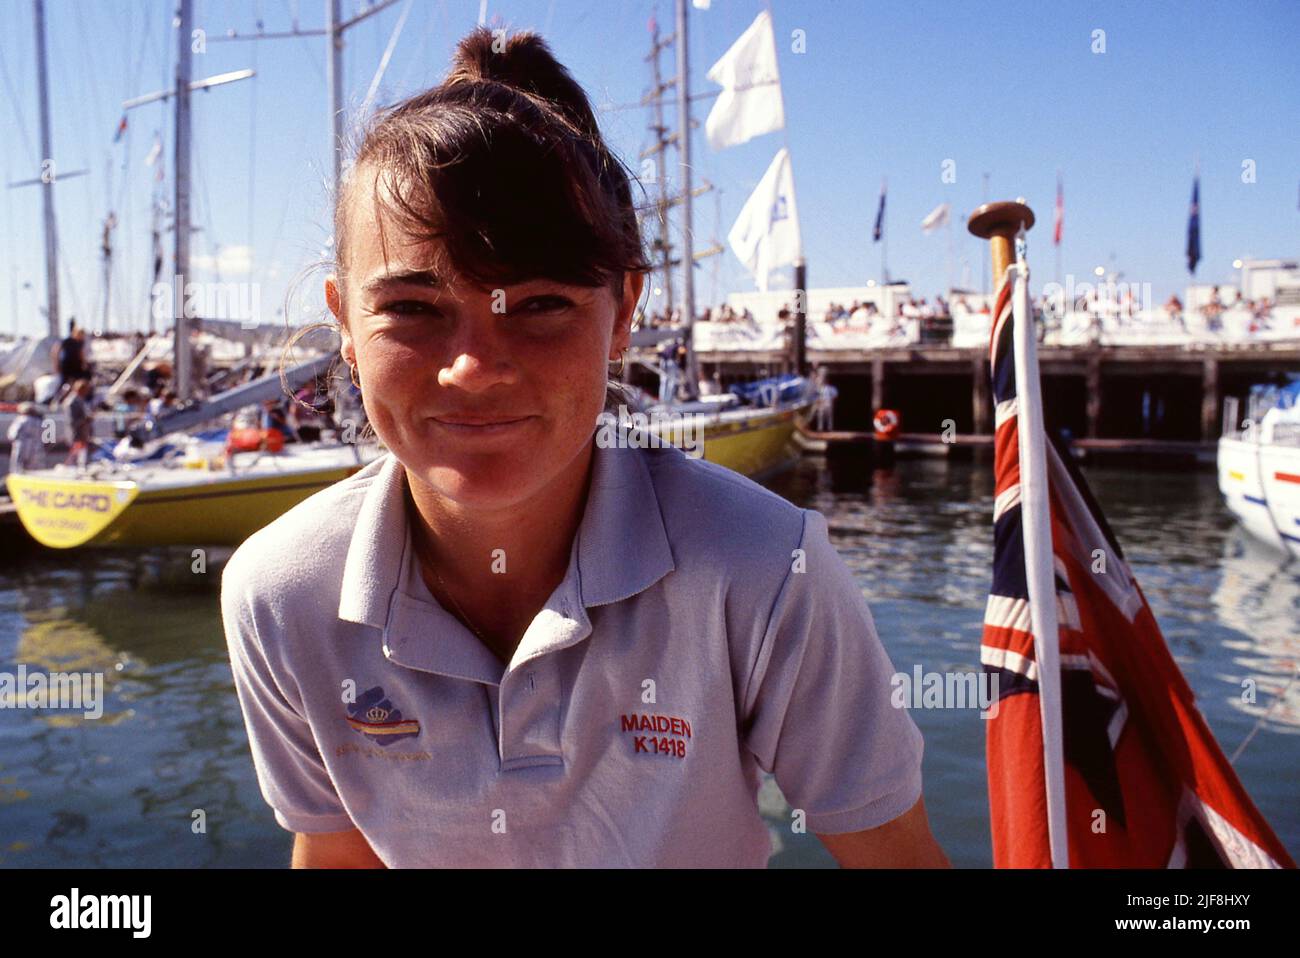 AJAXNETPHOTO. 1989. SOUTHAMPTON, ENGLAND. - WHITBREAD ROUND THE WORLD RACE - TRACY EDWARDS, SKIPPER OF THE YACHT MAIDEN, THE ONLY ENTRY WITH AN ALL-GIRL CREW.  PHOTO:JONATHAN EASTLAND/AJAX REF:890844 Stock Photo